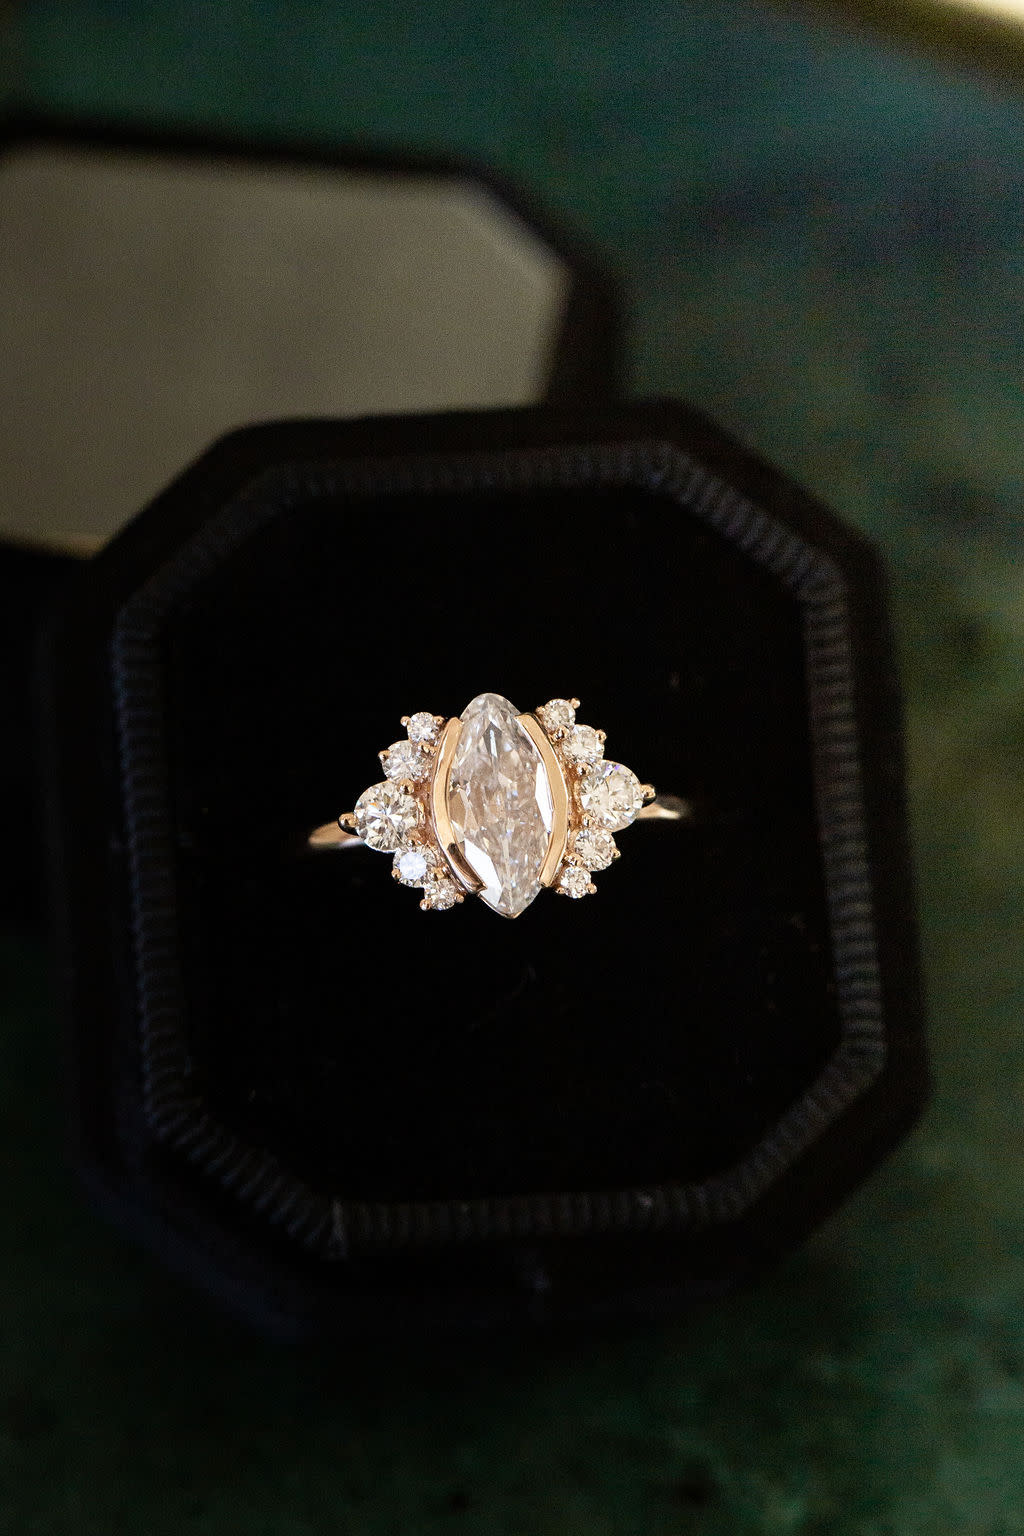 Vintage Mine Cut Diamond Engagement Ring with Baguettes | Joint Venture  Jewelry | Cary, NC